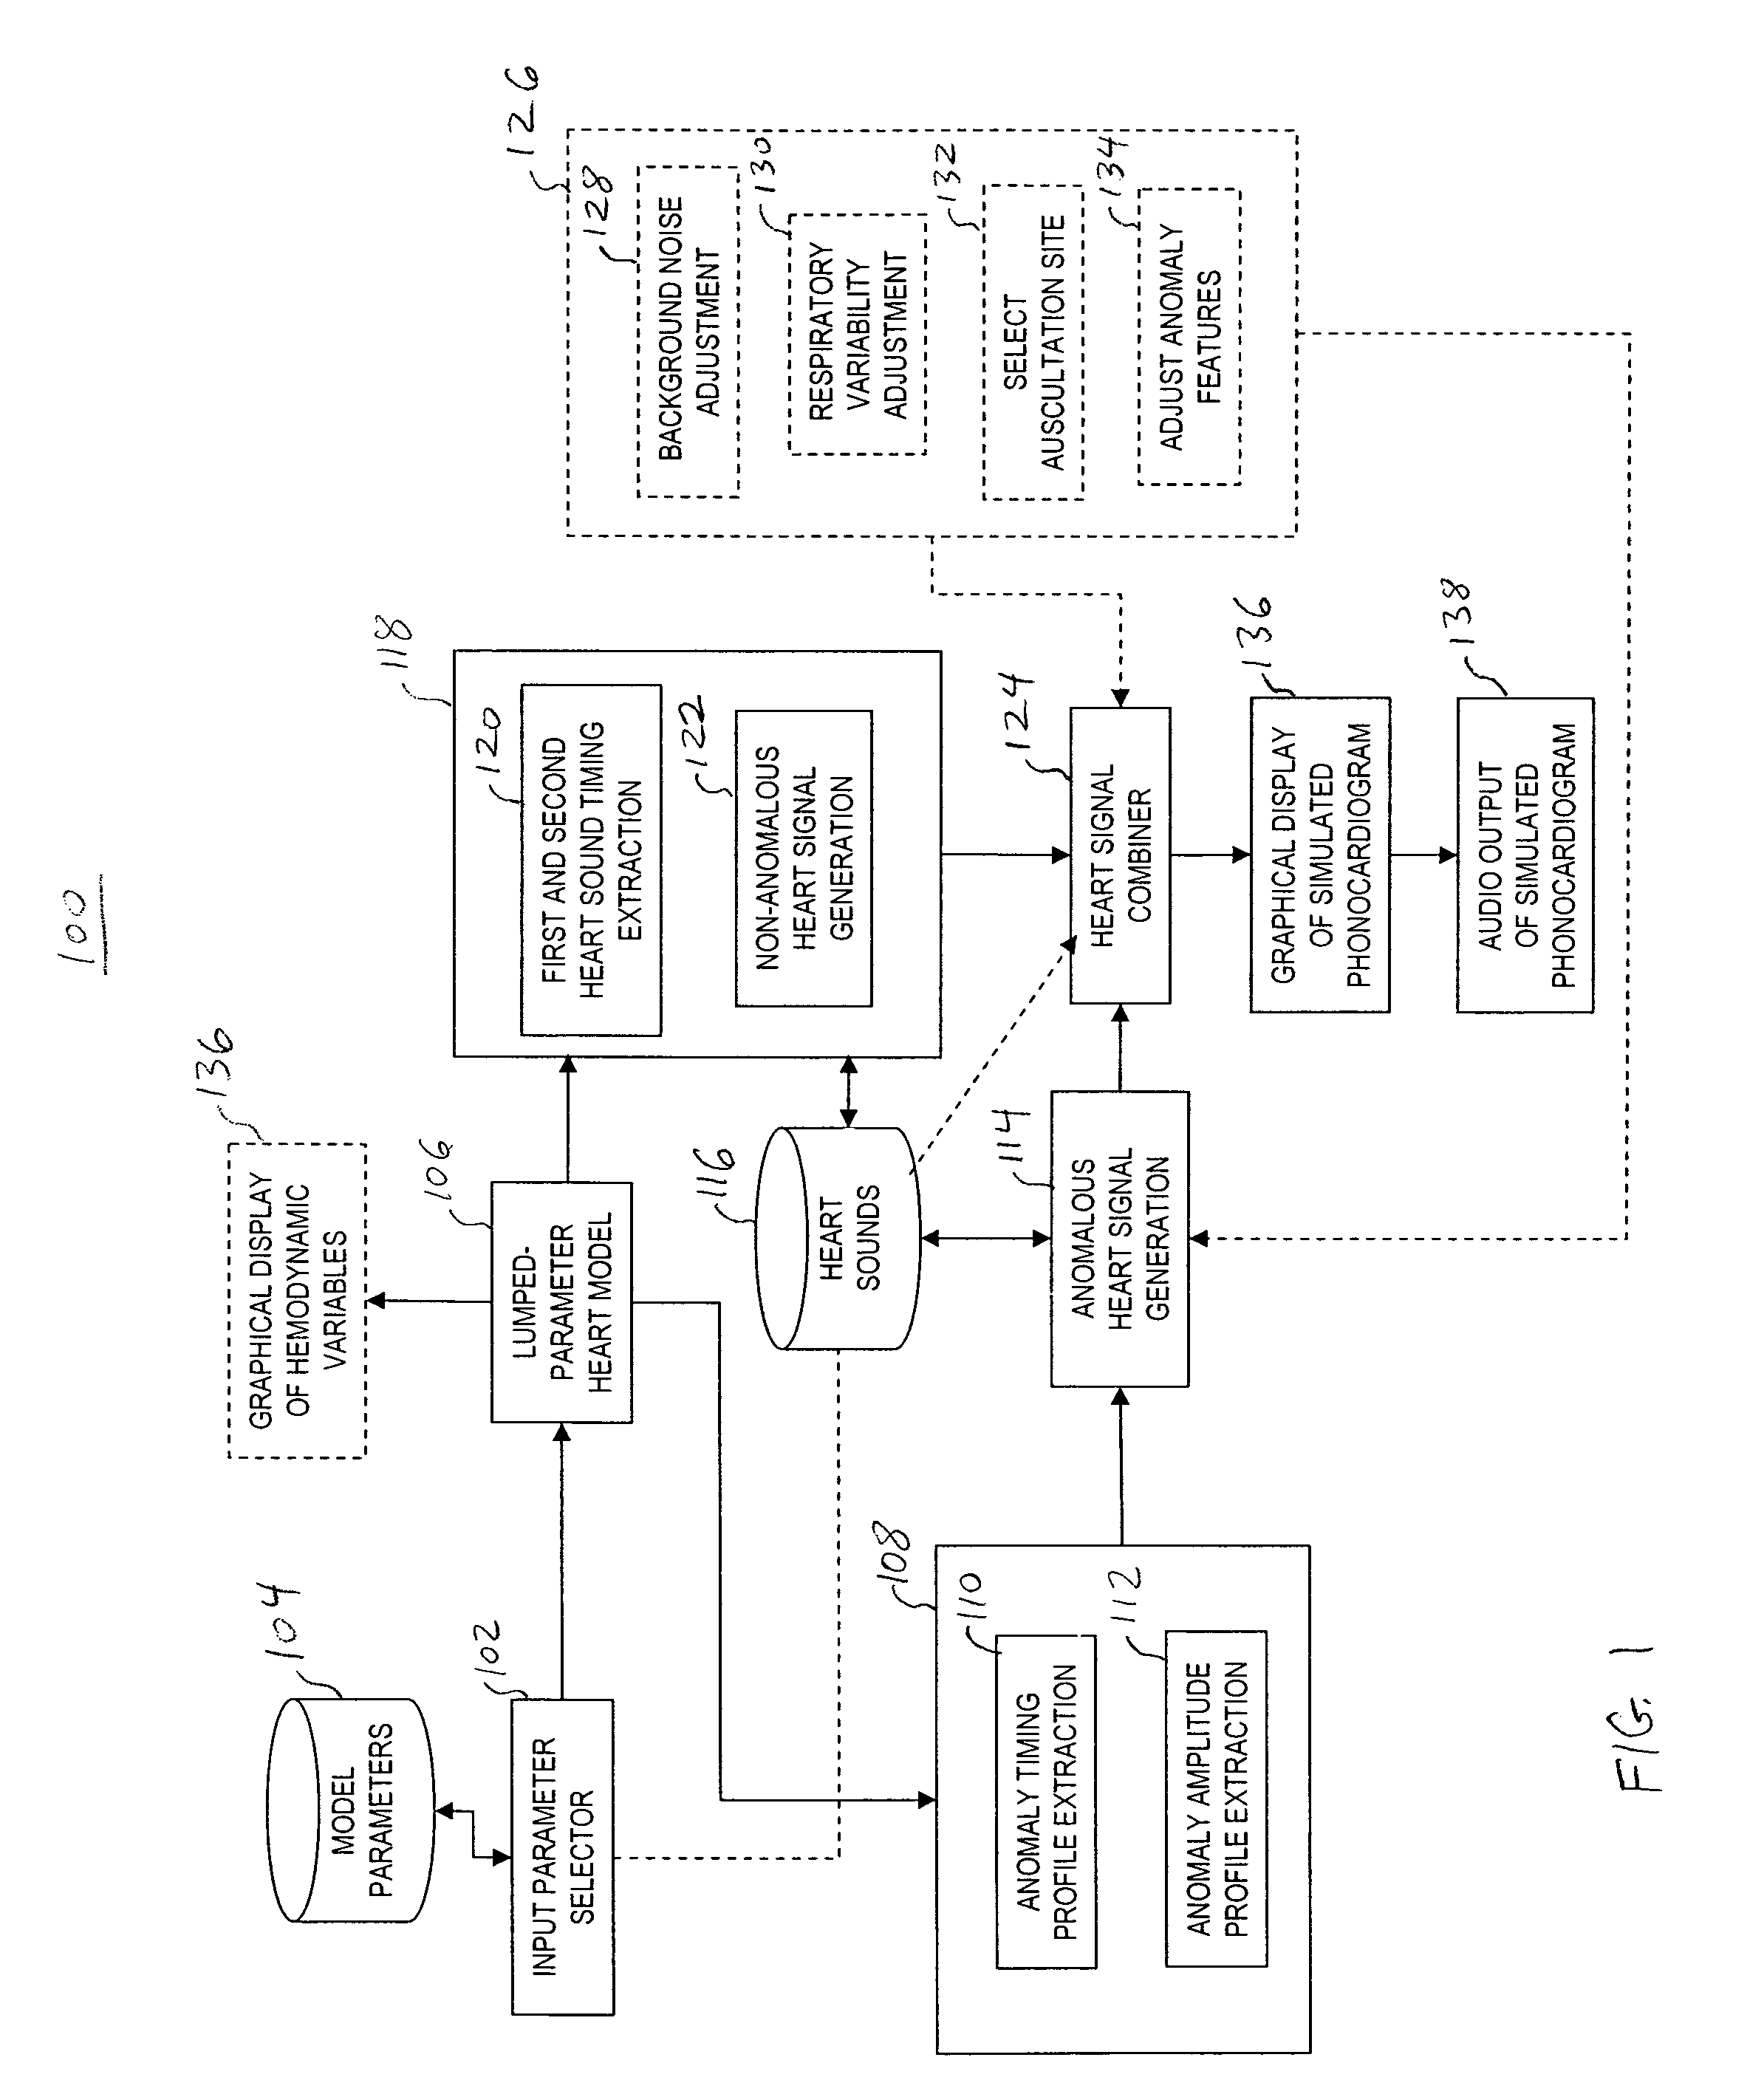 Automatic generation of heart sounds and murmurs using a lumped-parameter recirculating pressure-flow model for the left heart